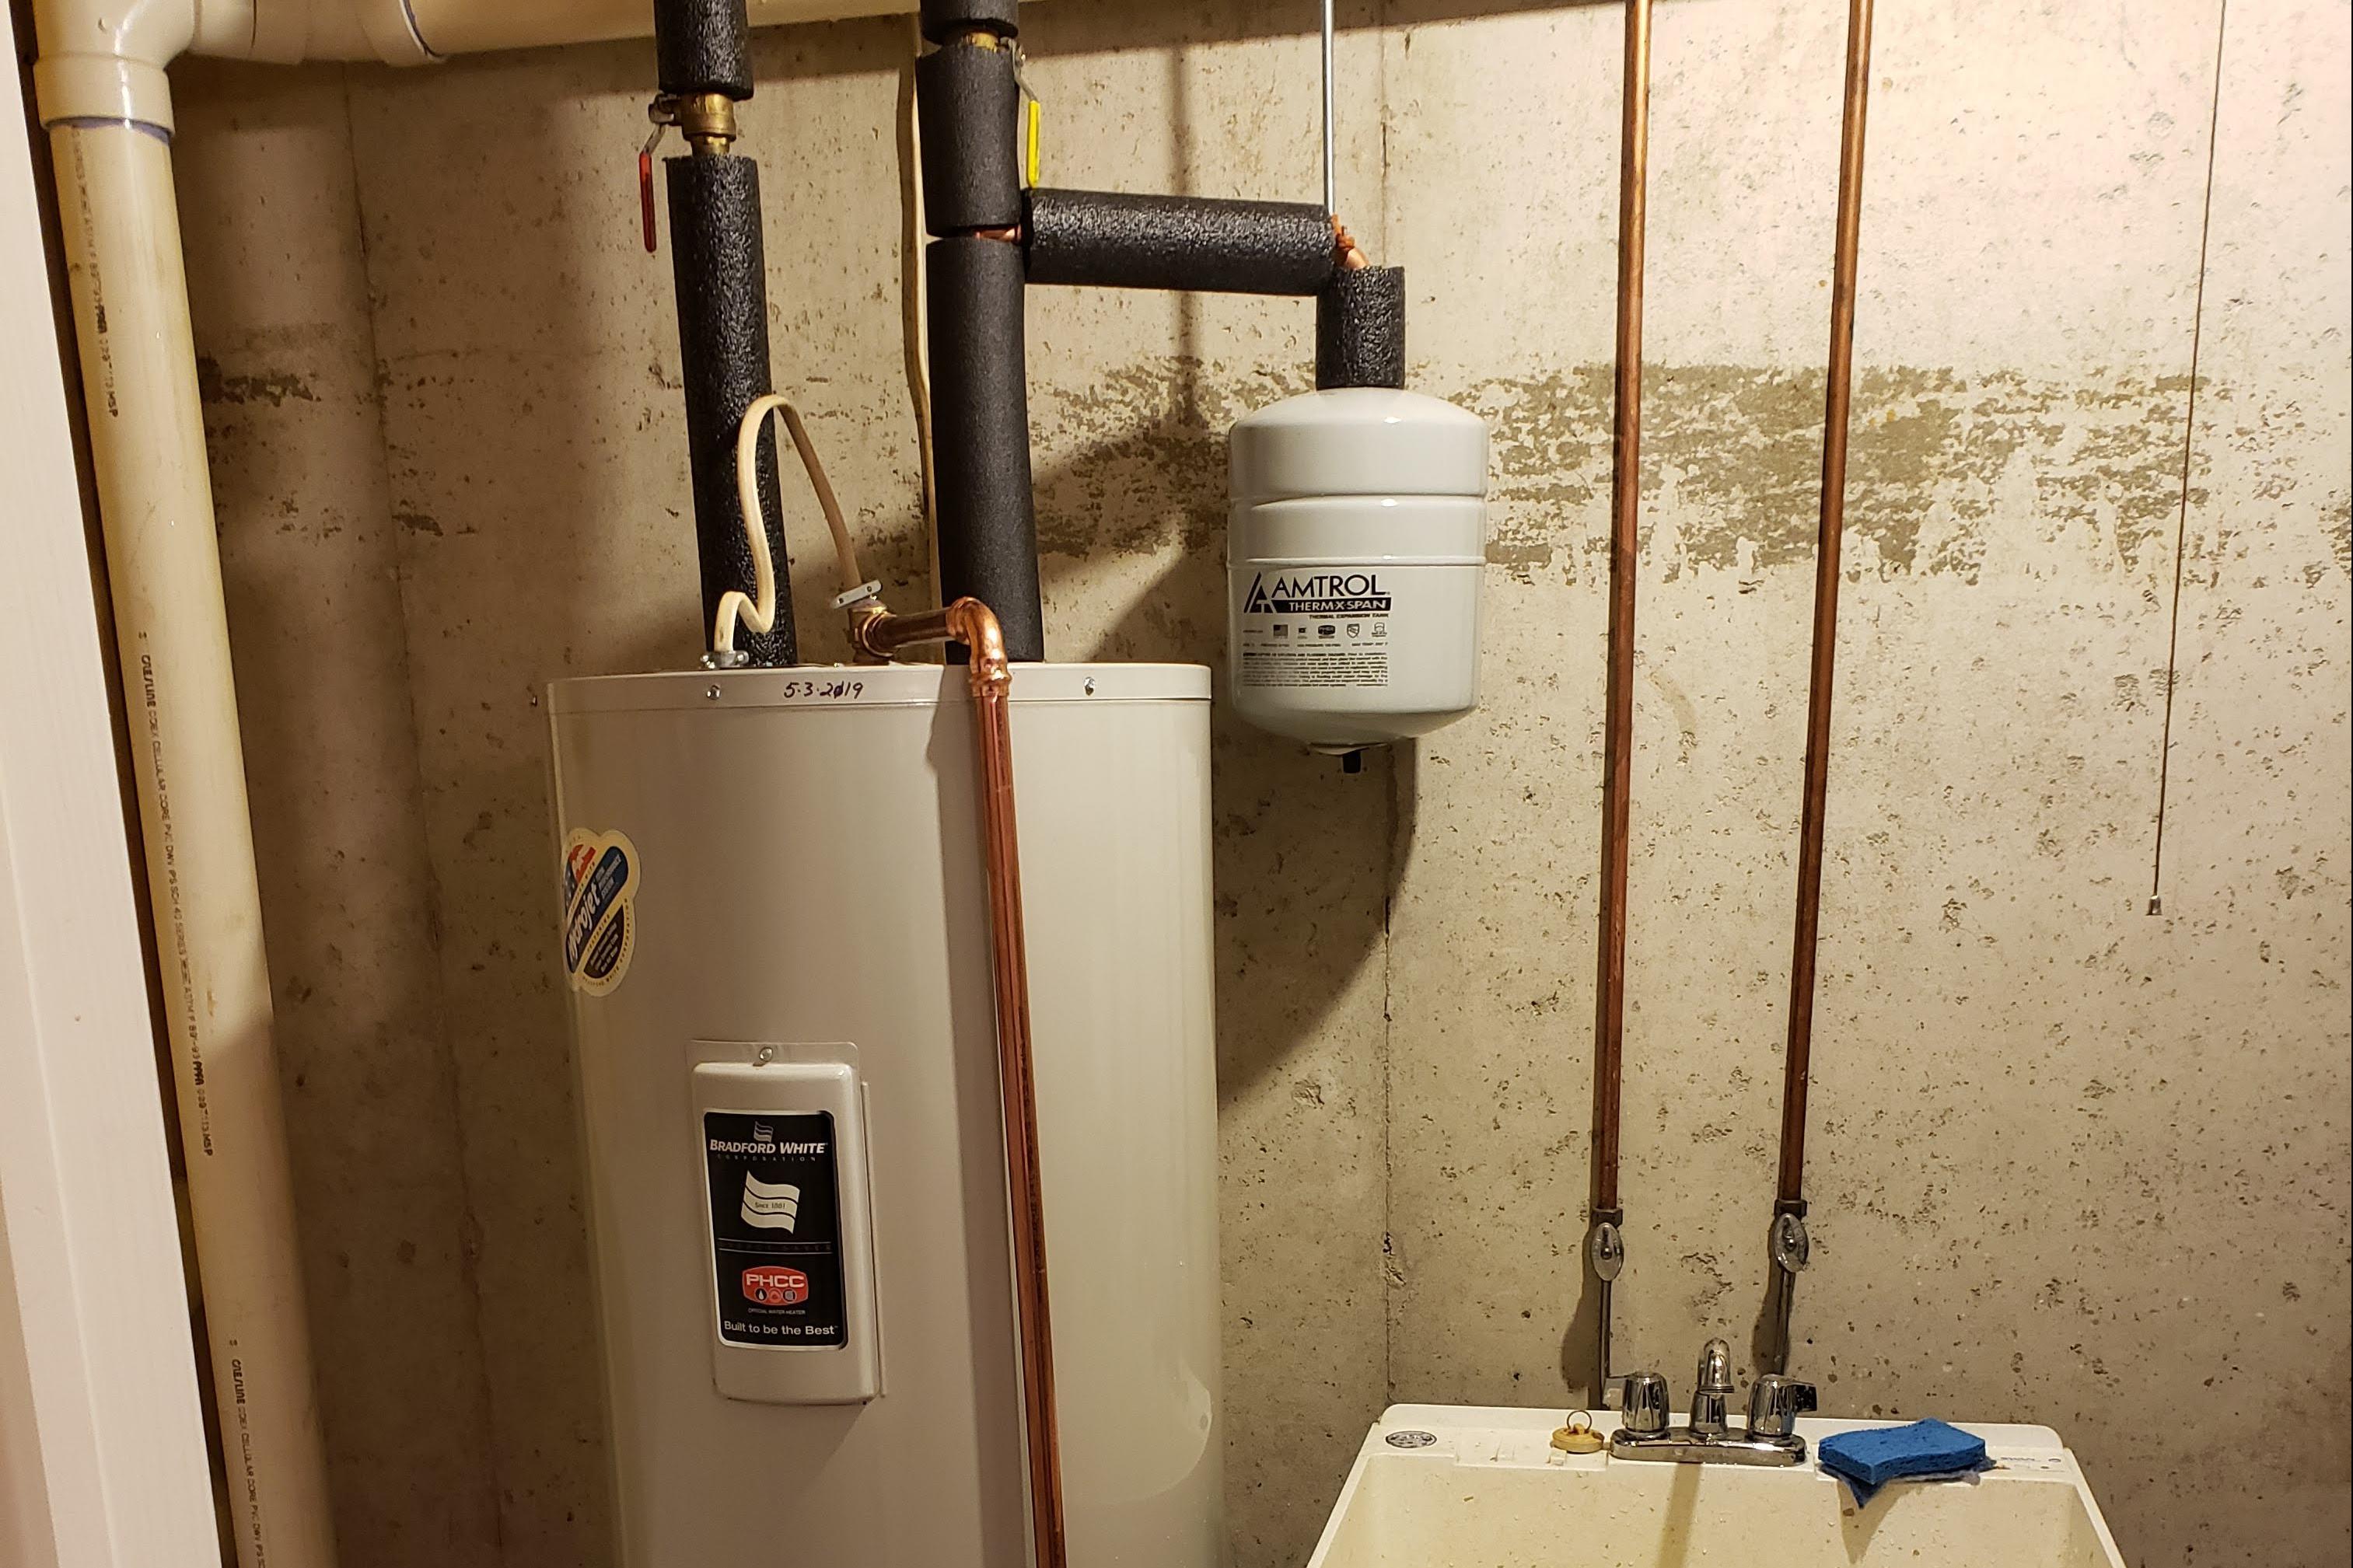 New water heater in a basement of Easton, PA. Expertly installed by Applause Plumbing and Heating. Enhanced insulation with extra foam around pipes for increased energy efficiency and optimal performance.